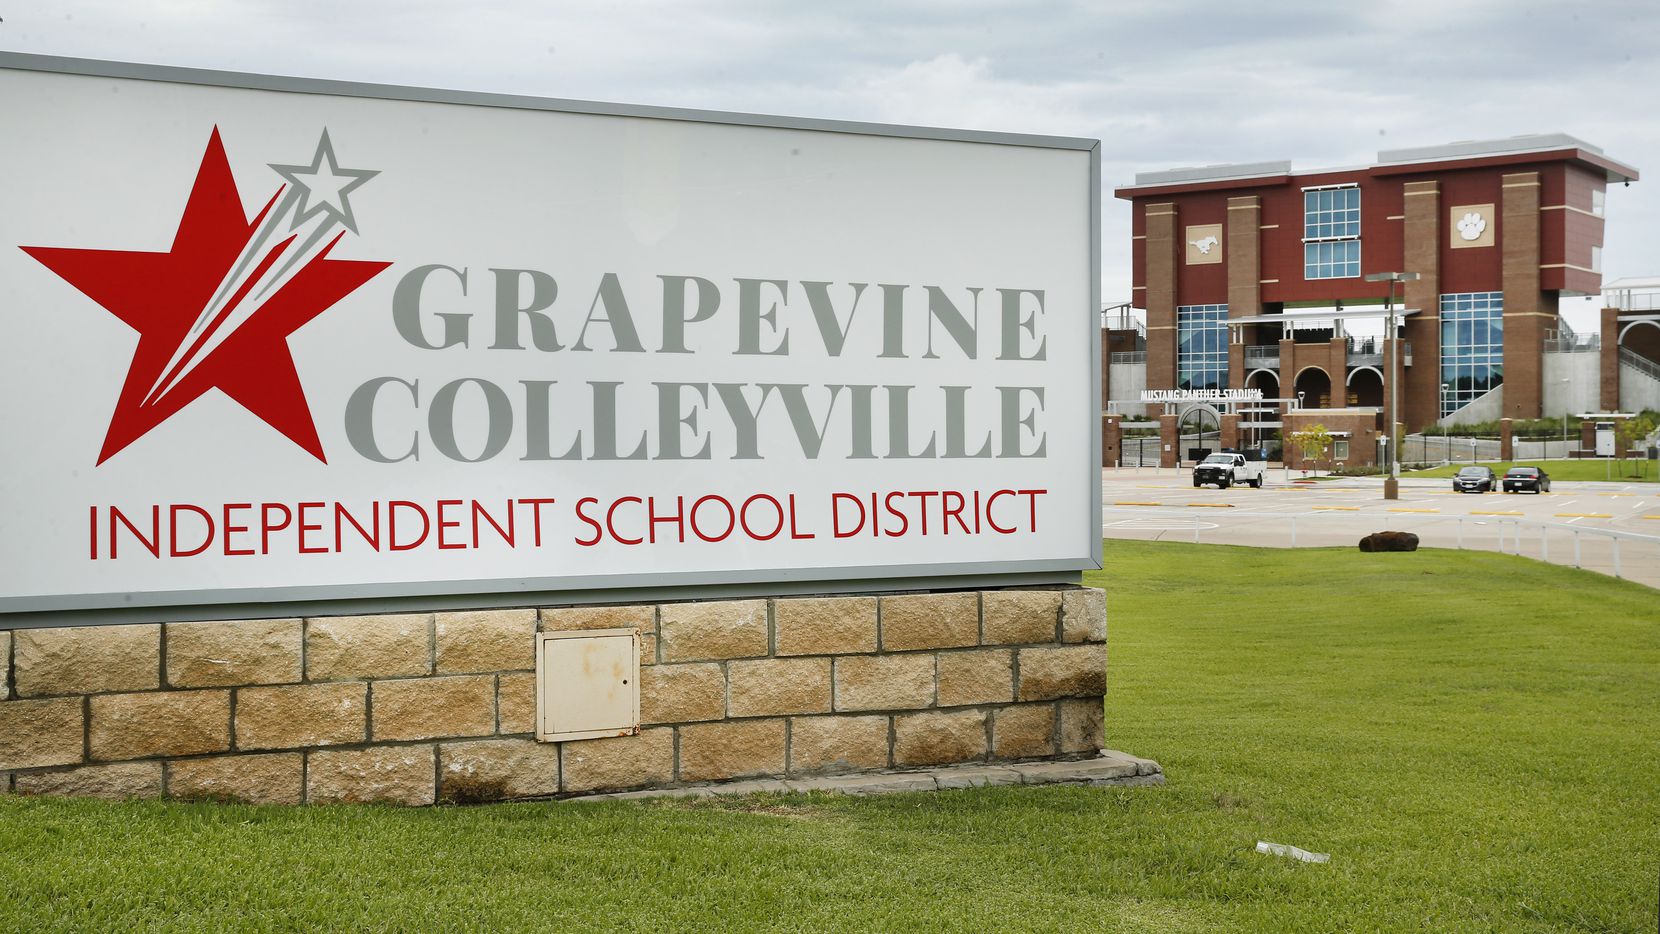 The Grapevine-Colleyville ISD sign is pictured before Mustang Panther Stadium in Grapevine, Texas, on June 23, 2020.